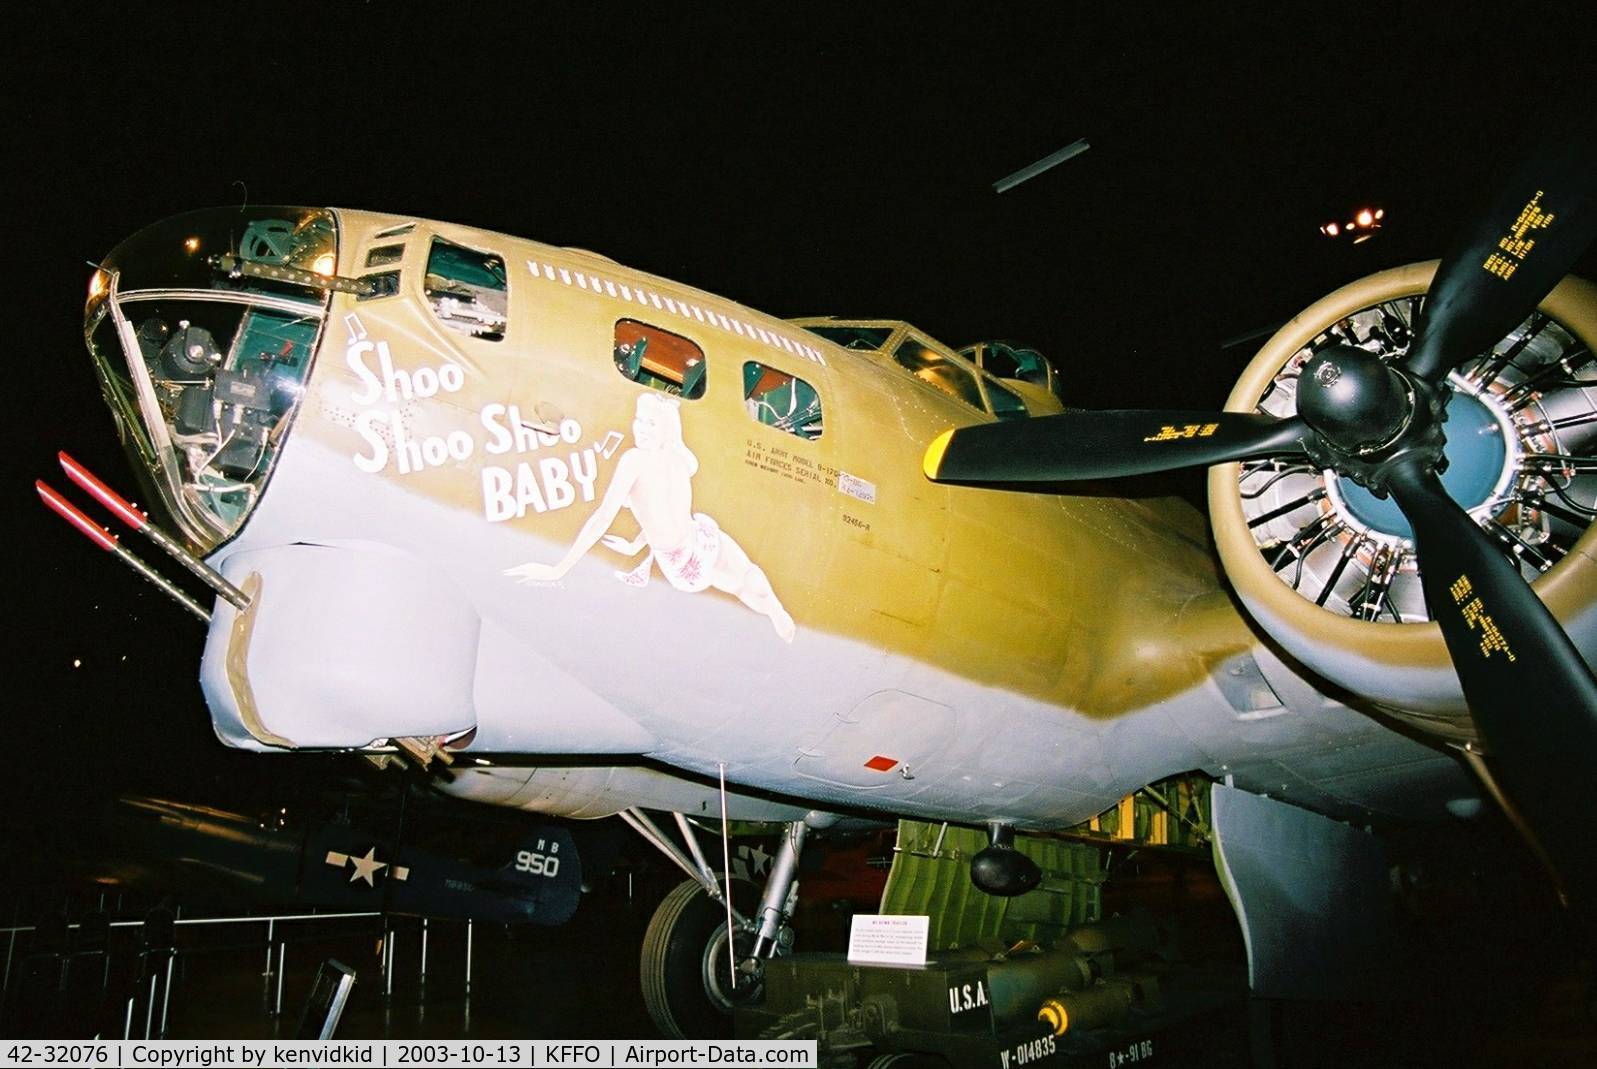 42-32076, 1942 Boeing B-17G Flying Fortress C/N 7190, At the Museum of the United States Air Force Dayton Ohio.